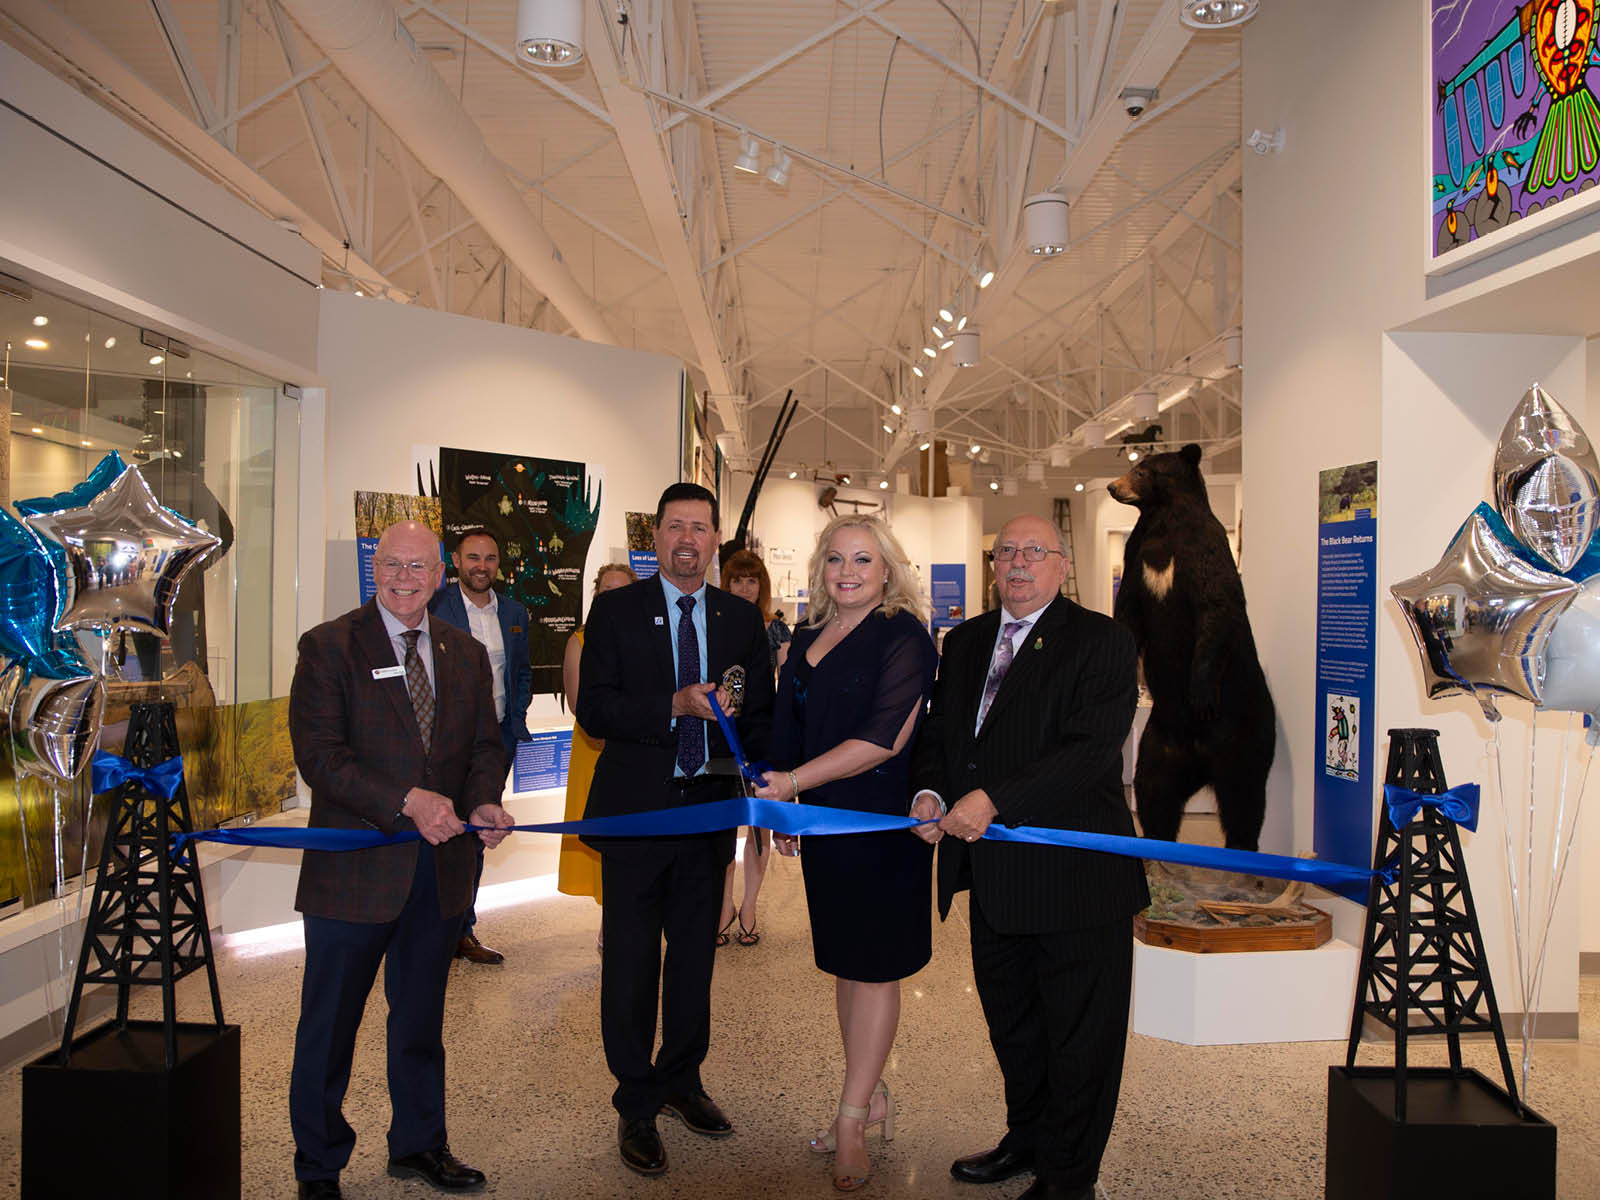 Lambton Shores Mayor and County Councillor Doug Cook cuts the ceremonial ribbon at the exhibit opening with Lambton County Warden Kevin Marriott, Lambton Kent Middlesex MP Lianne Rood, and Sarnia Lambton MPP Bob Bailey